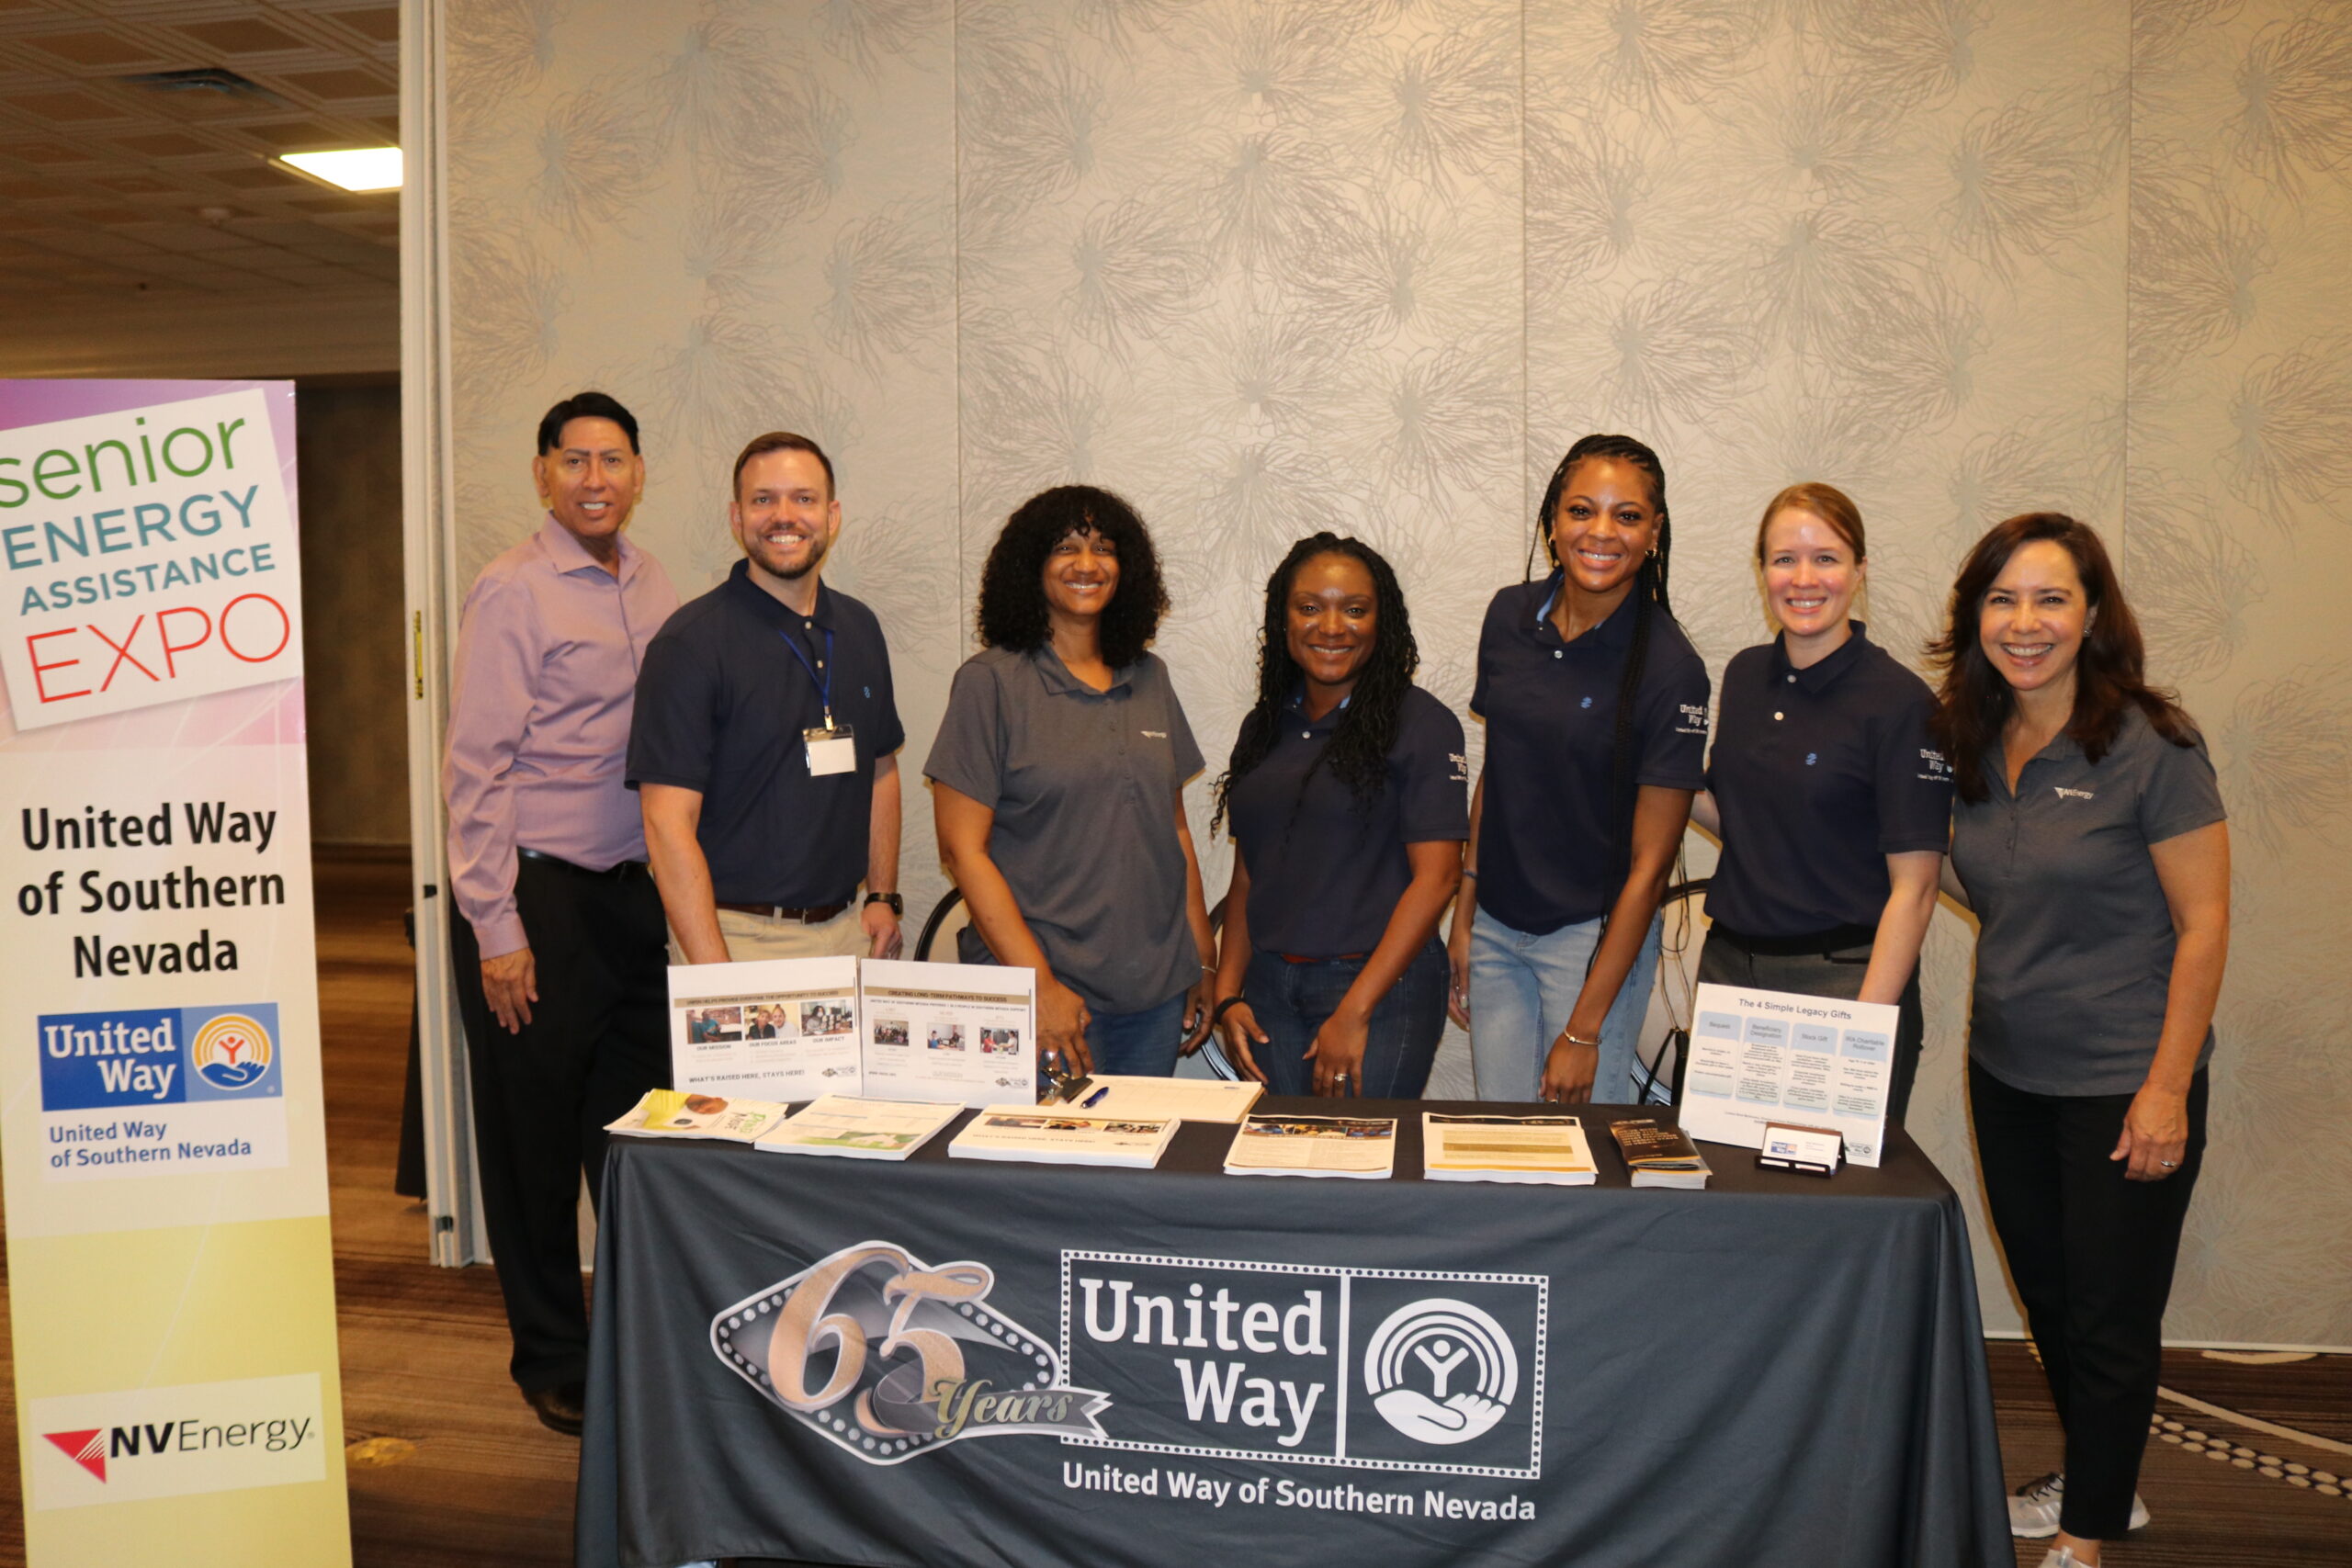 UWSN staff and NV Energy staff at the Senior Expos